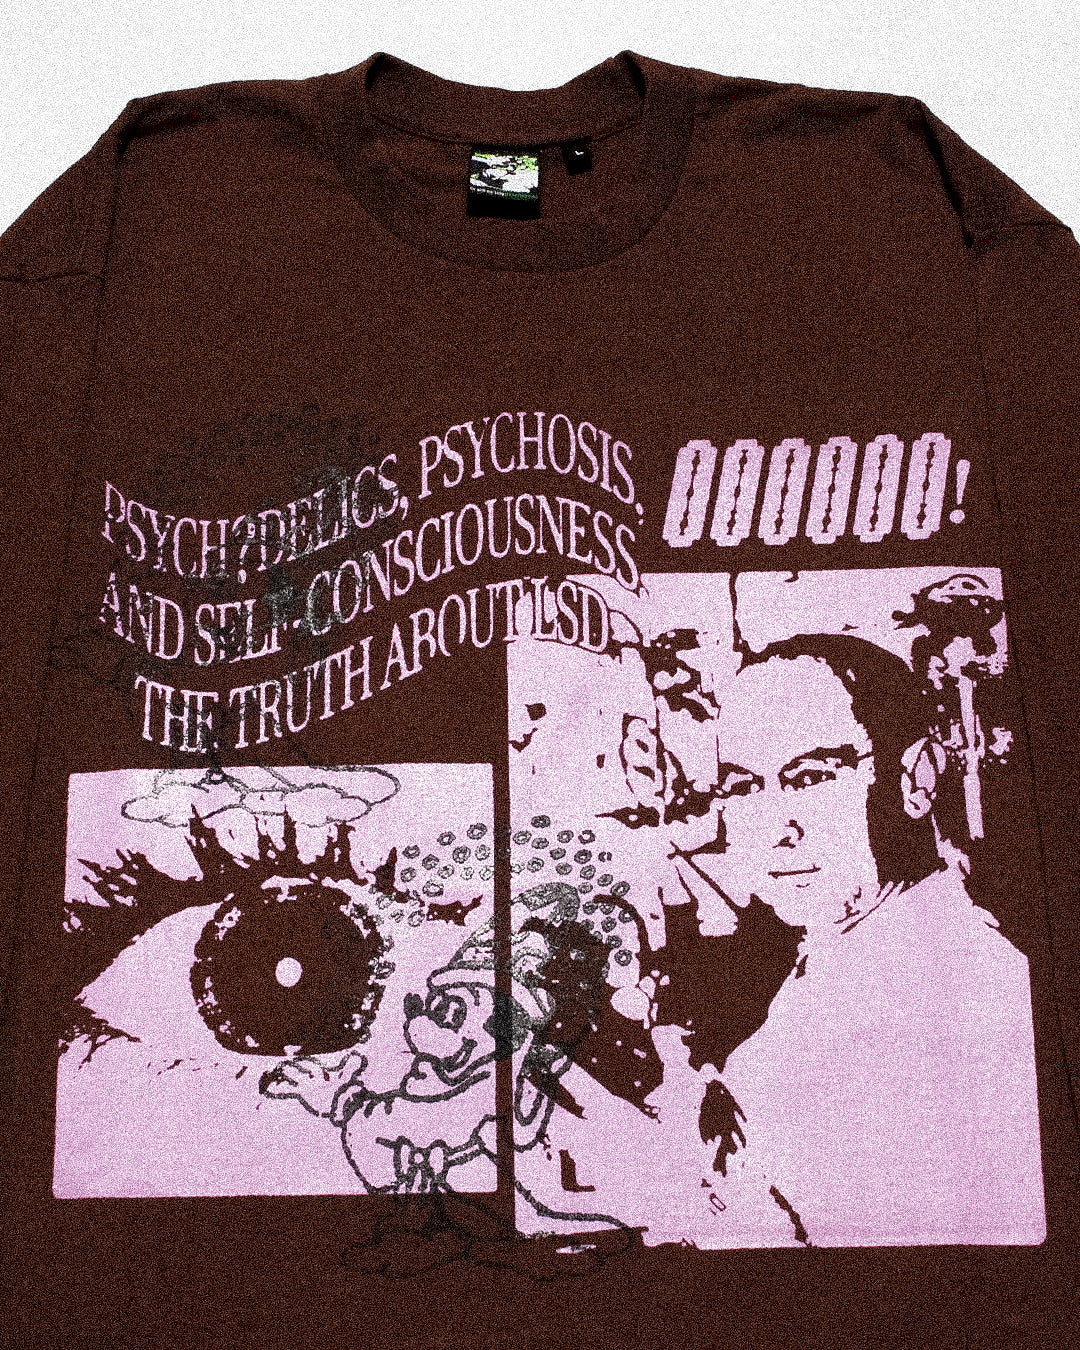 "PSYCHEDELCS & PSYCHOSIS IN FANTA6IA" Extreme Heavyweight Longsleeve Tee (L)